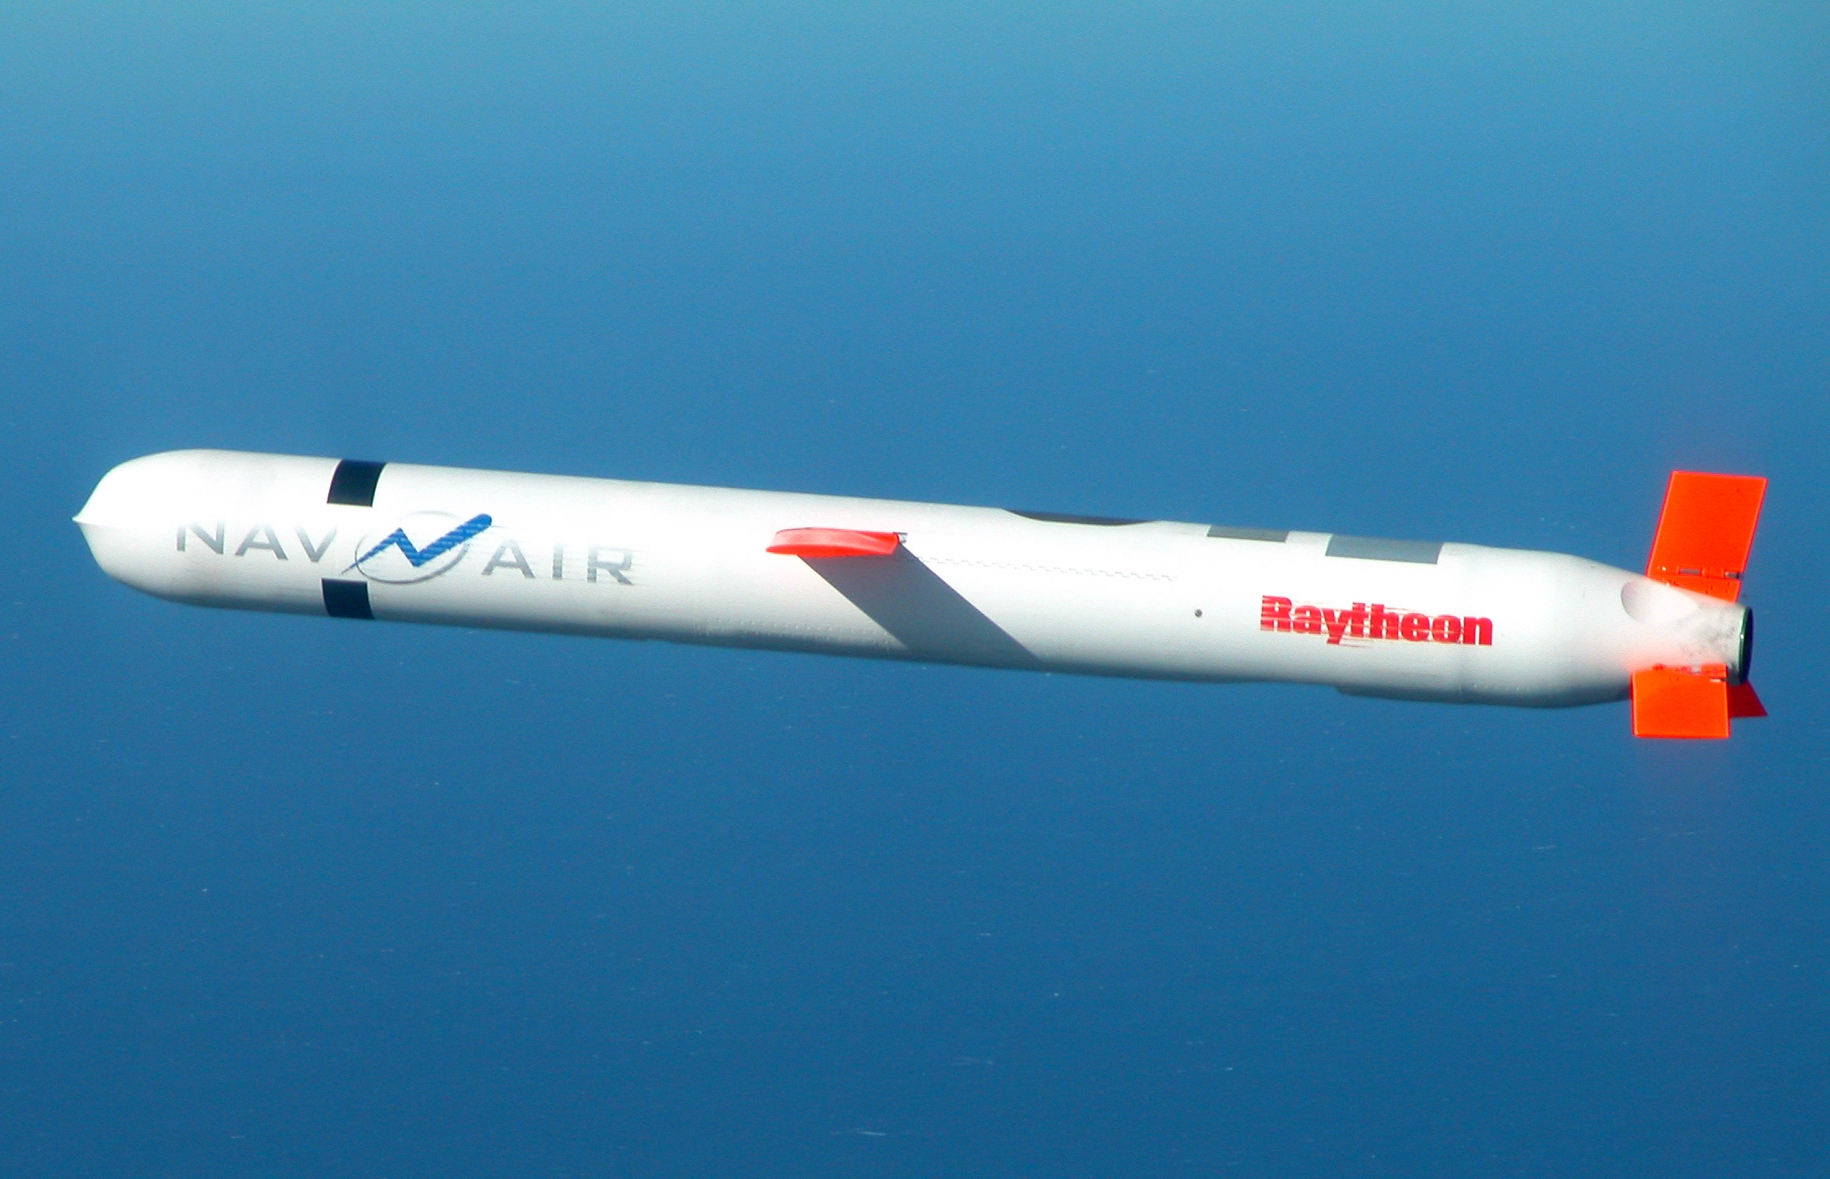 <p>Tomahawk Land Attack Missile</p><p>All-weather, long range, subsonic missile for LAND ATTACKS</p><p>Launched via: VLS or Torpedo Tube</p><p>Typically a 1,000 lb. warhead, but can be configured to release combined effect bomblets (anti-airfield).</p>